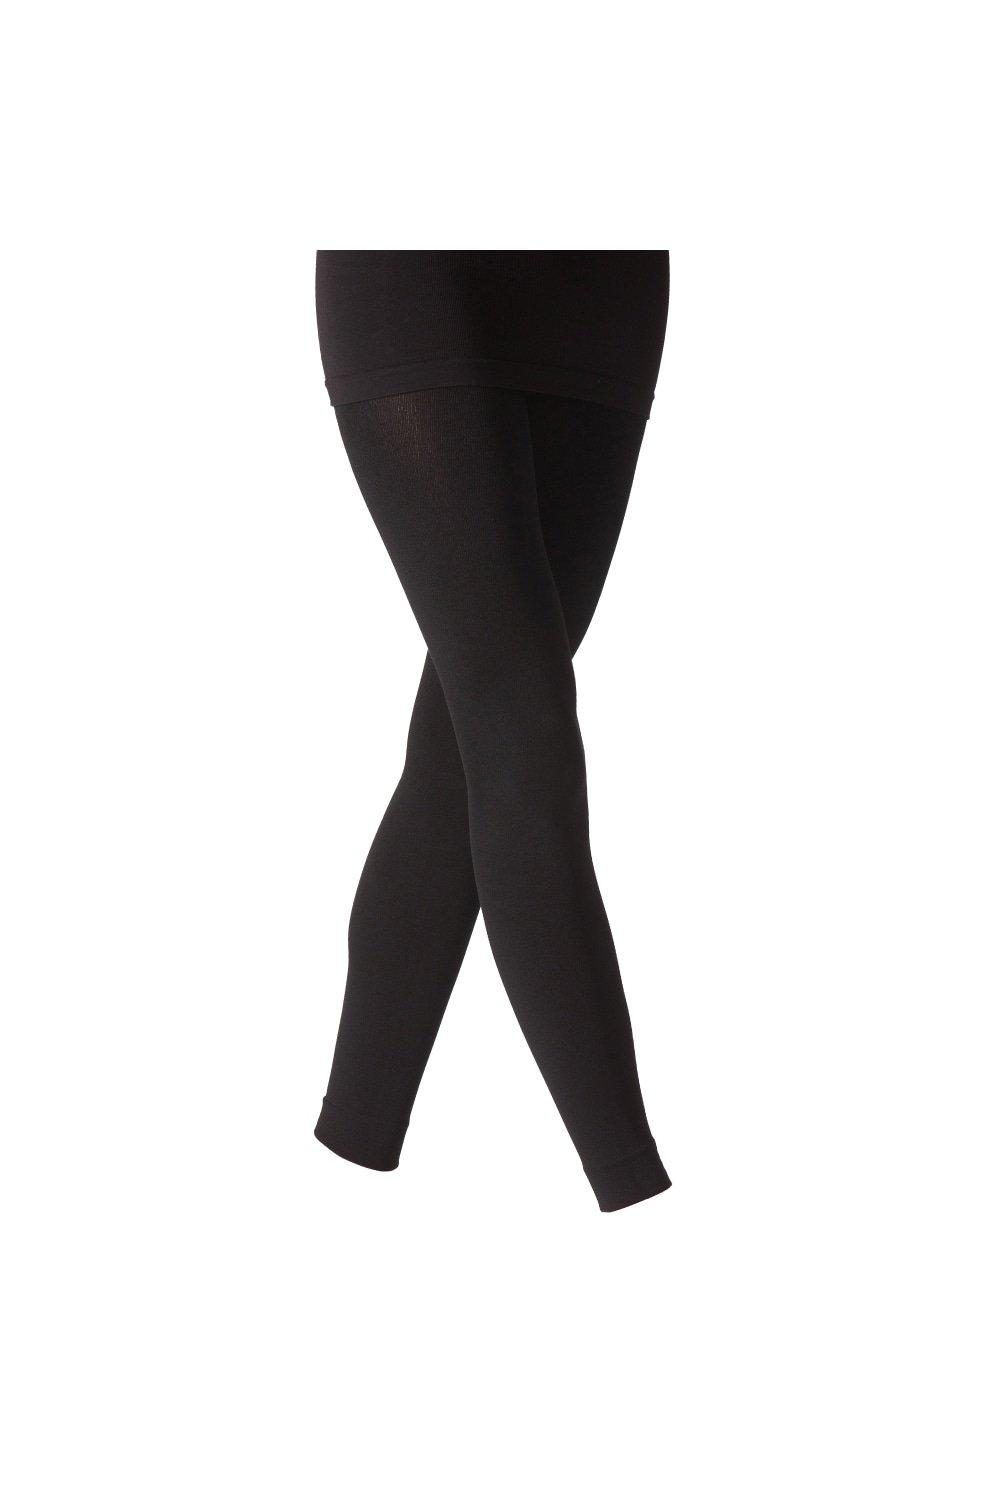 Shop Womens 200 Denier Tights up to 80% Off